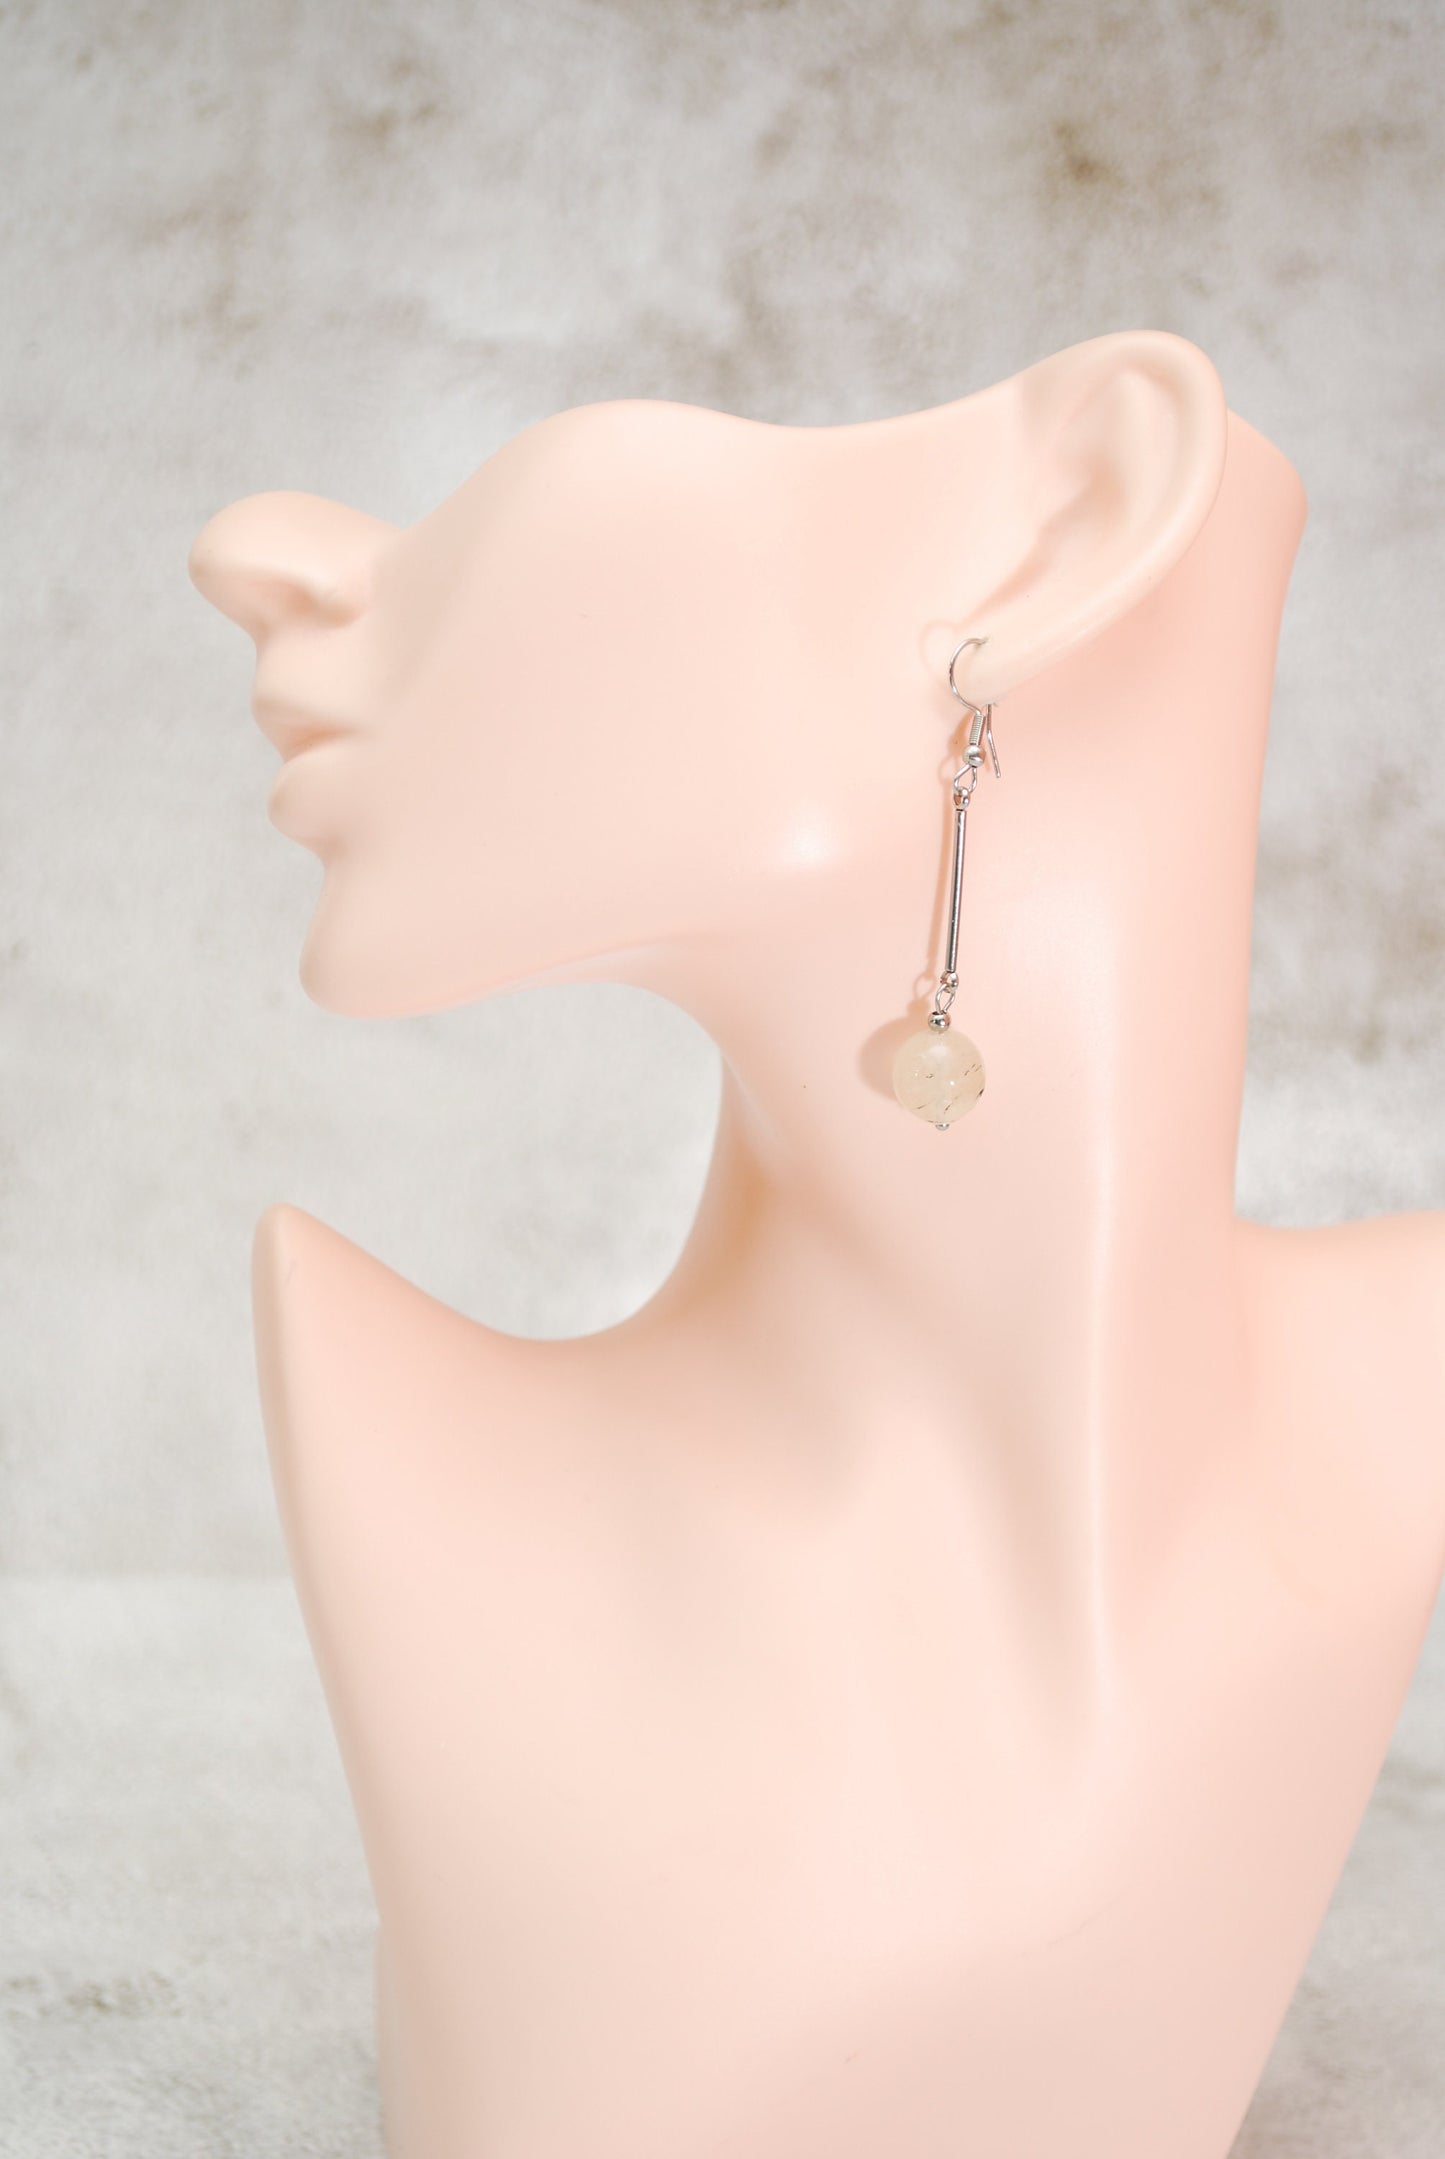 Estibela's Boho Agate Big Round Stone and Stainless Steel Stick Earrings: Enhancing Beauty and Artistry in Your Jewelry Collection.